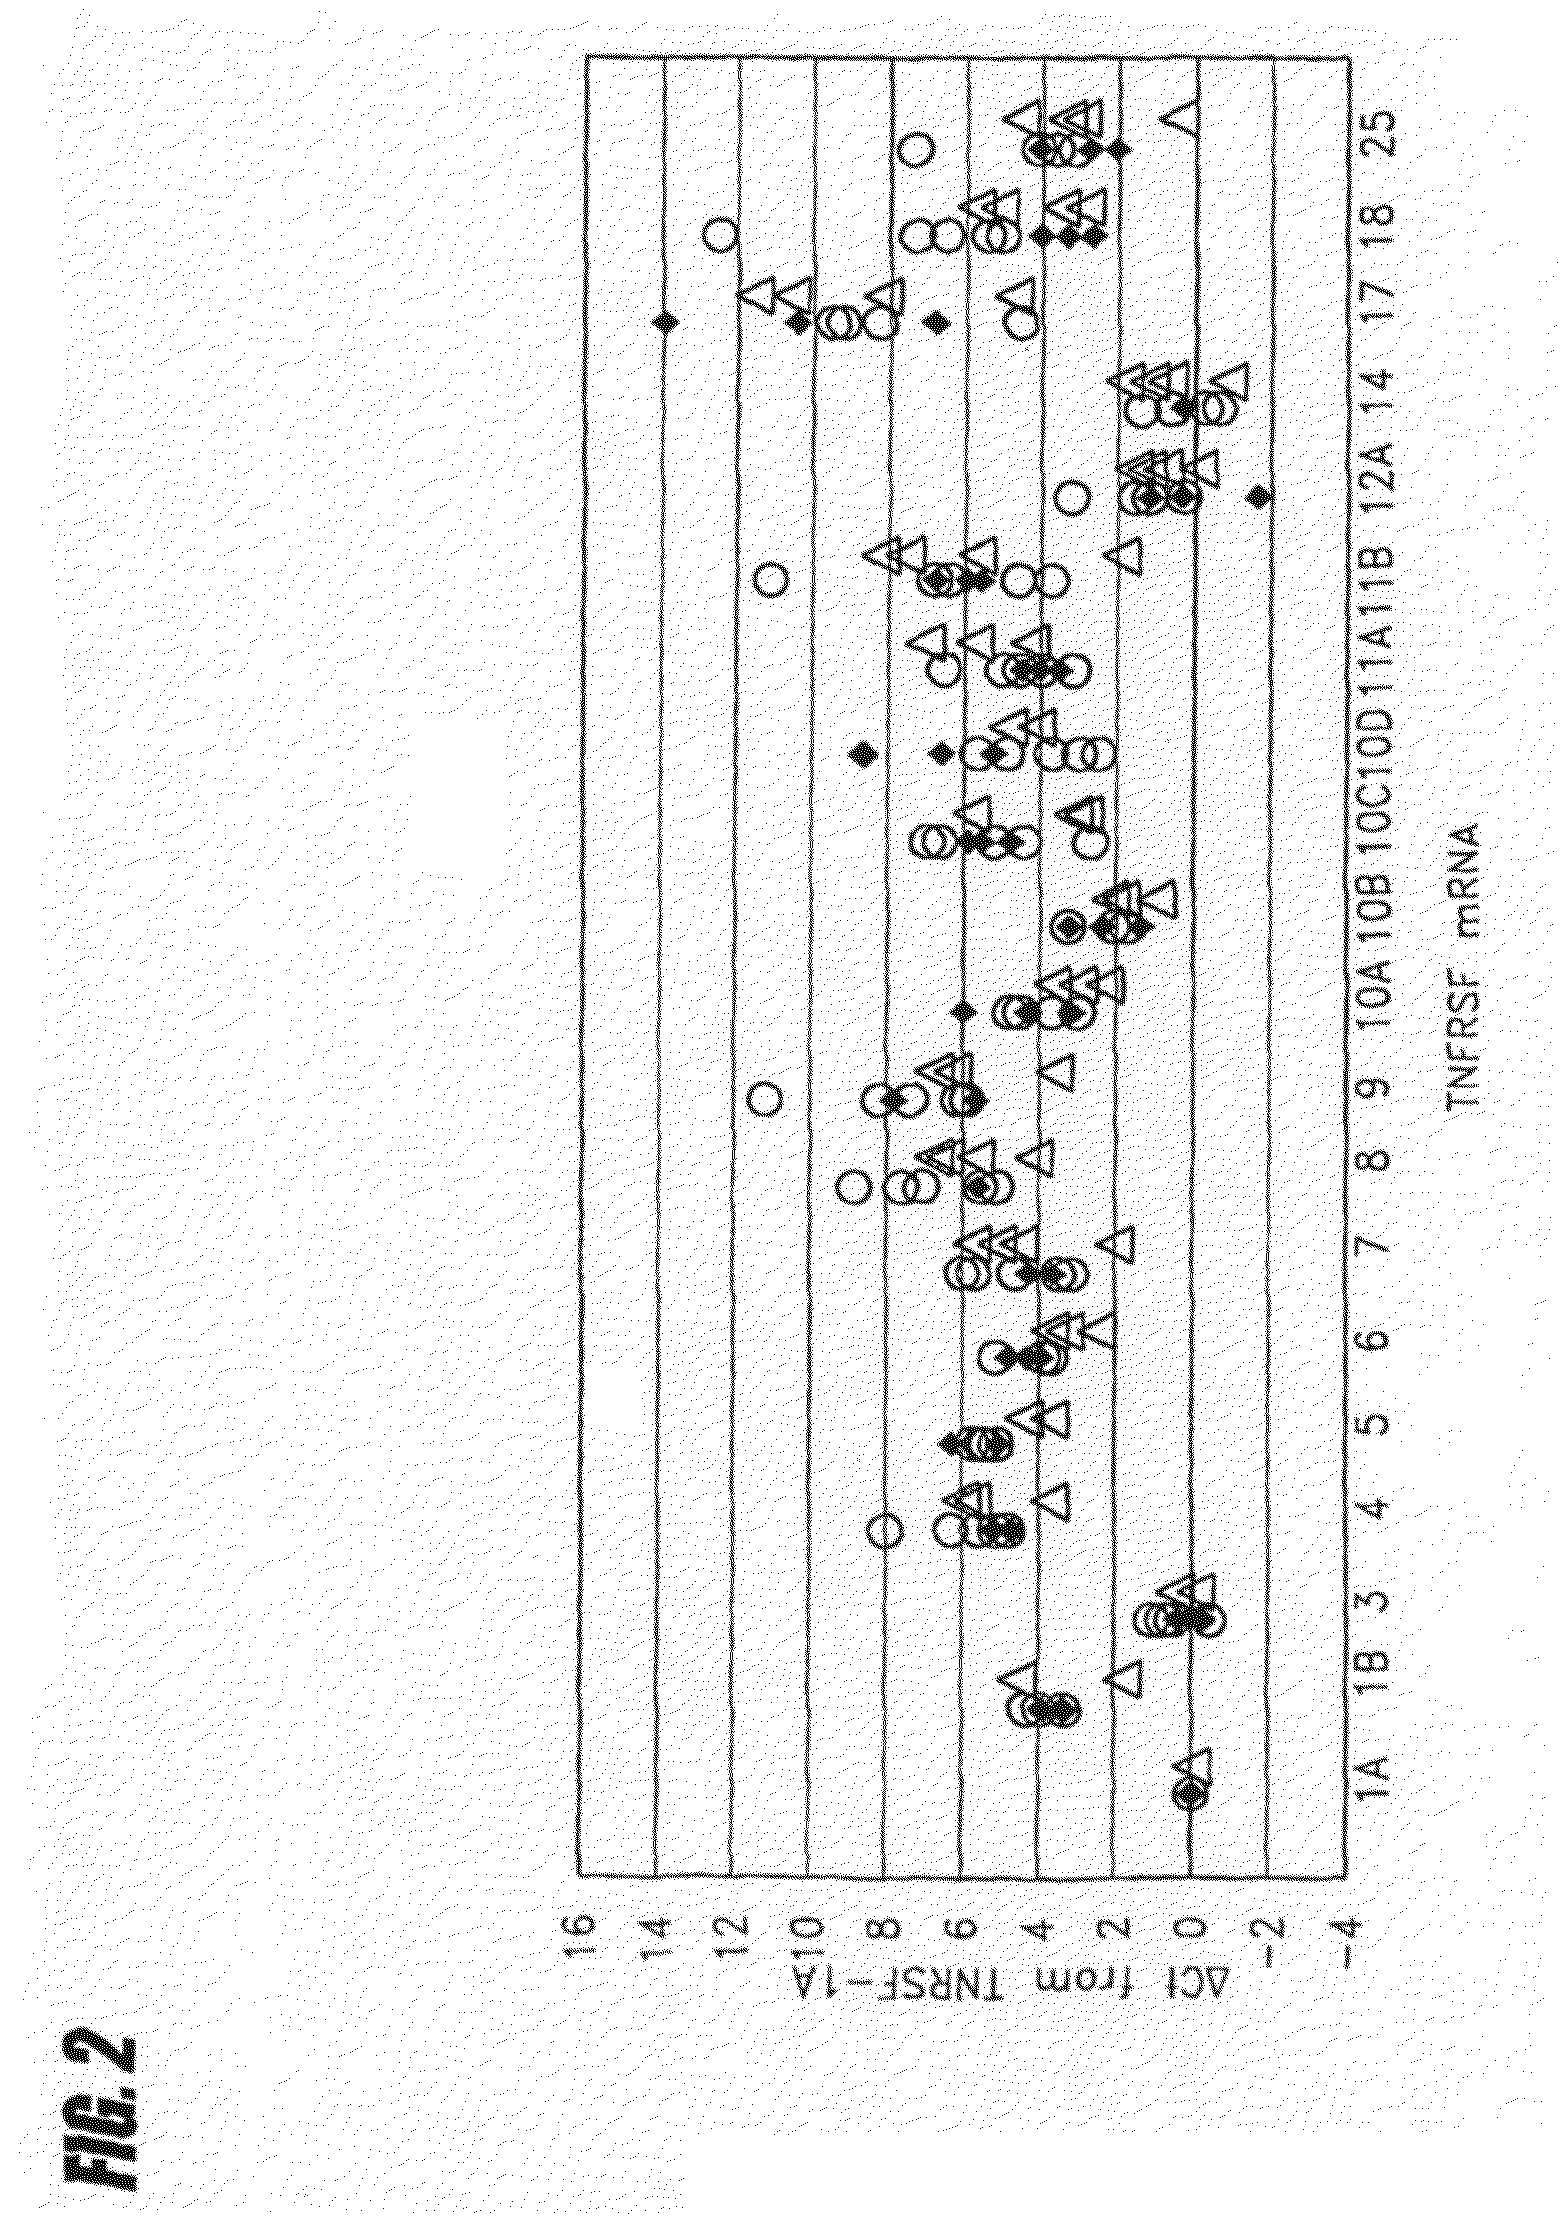 Method for predicting immune response to neoplastic disease based on mRNA expression profile in neoplastic cells and stimulated leukocytes